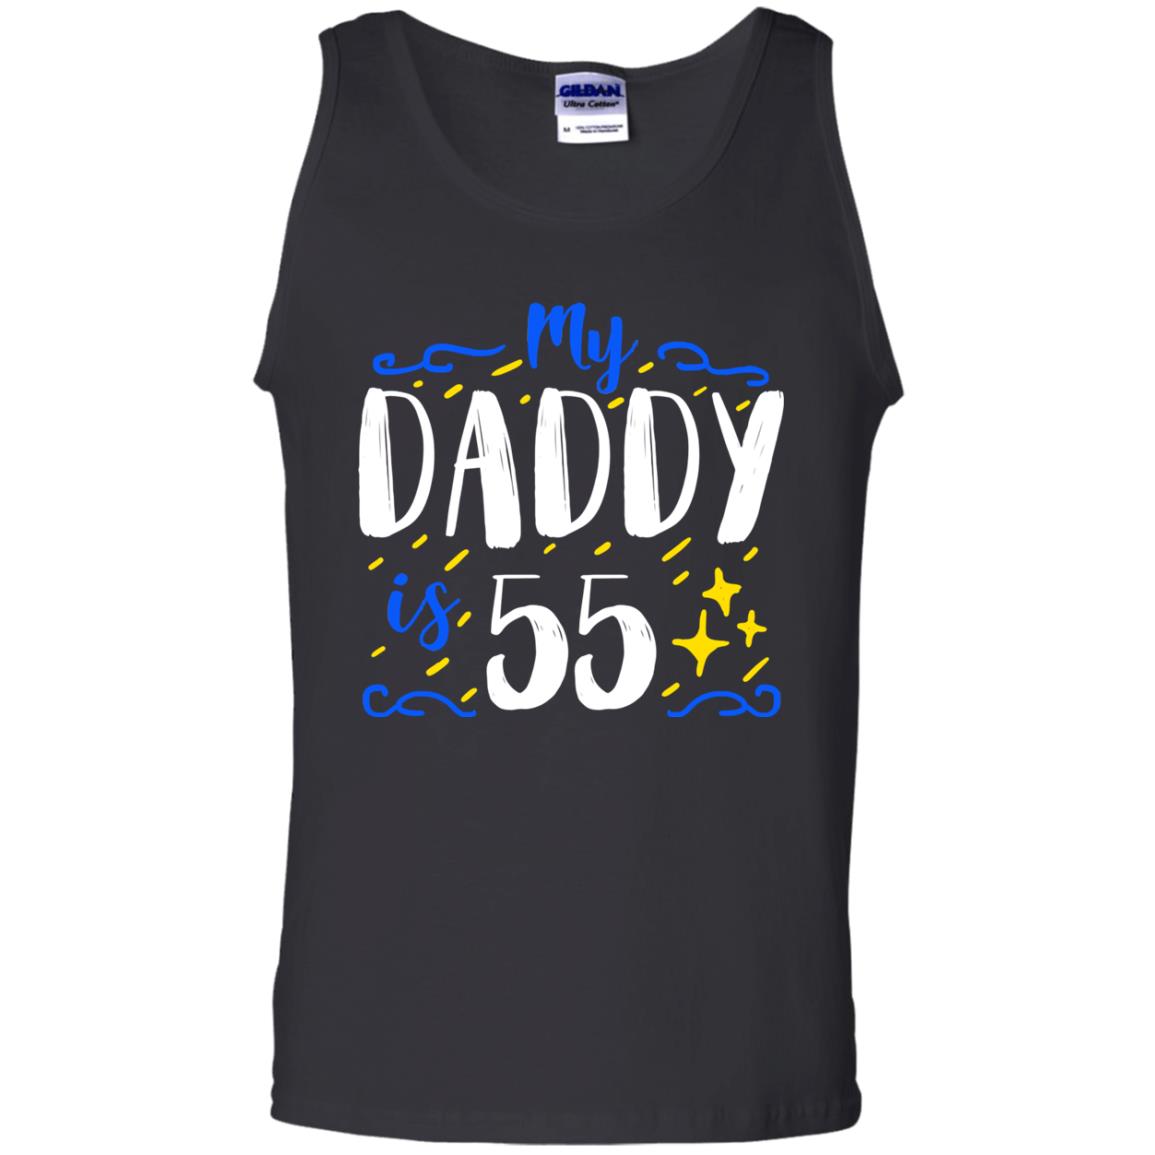 My Daddy Is 55 55th Birthday Daddy Shirt For Sons Or DaughtersG220 Gildan 100% Cotton Tank Top